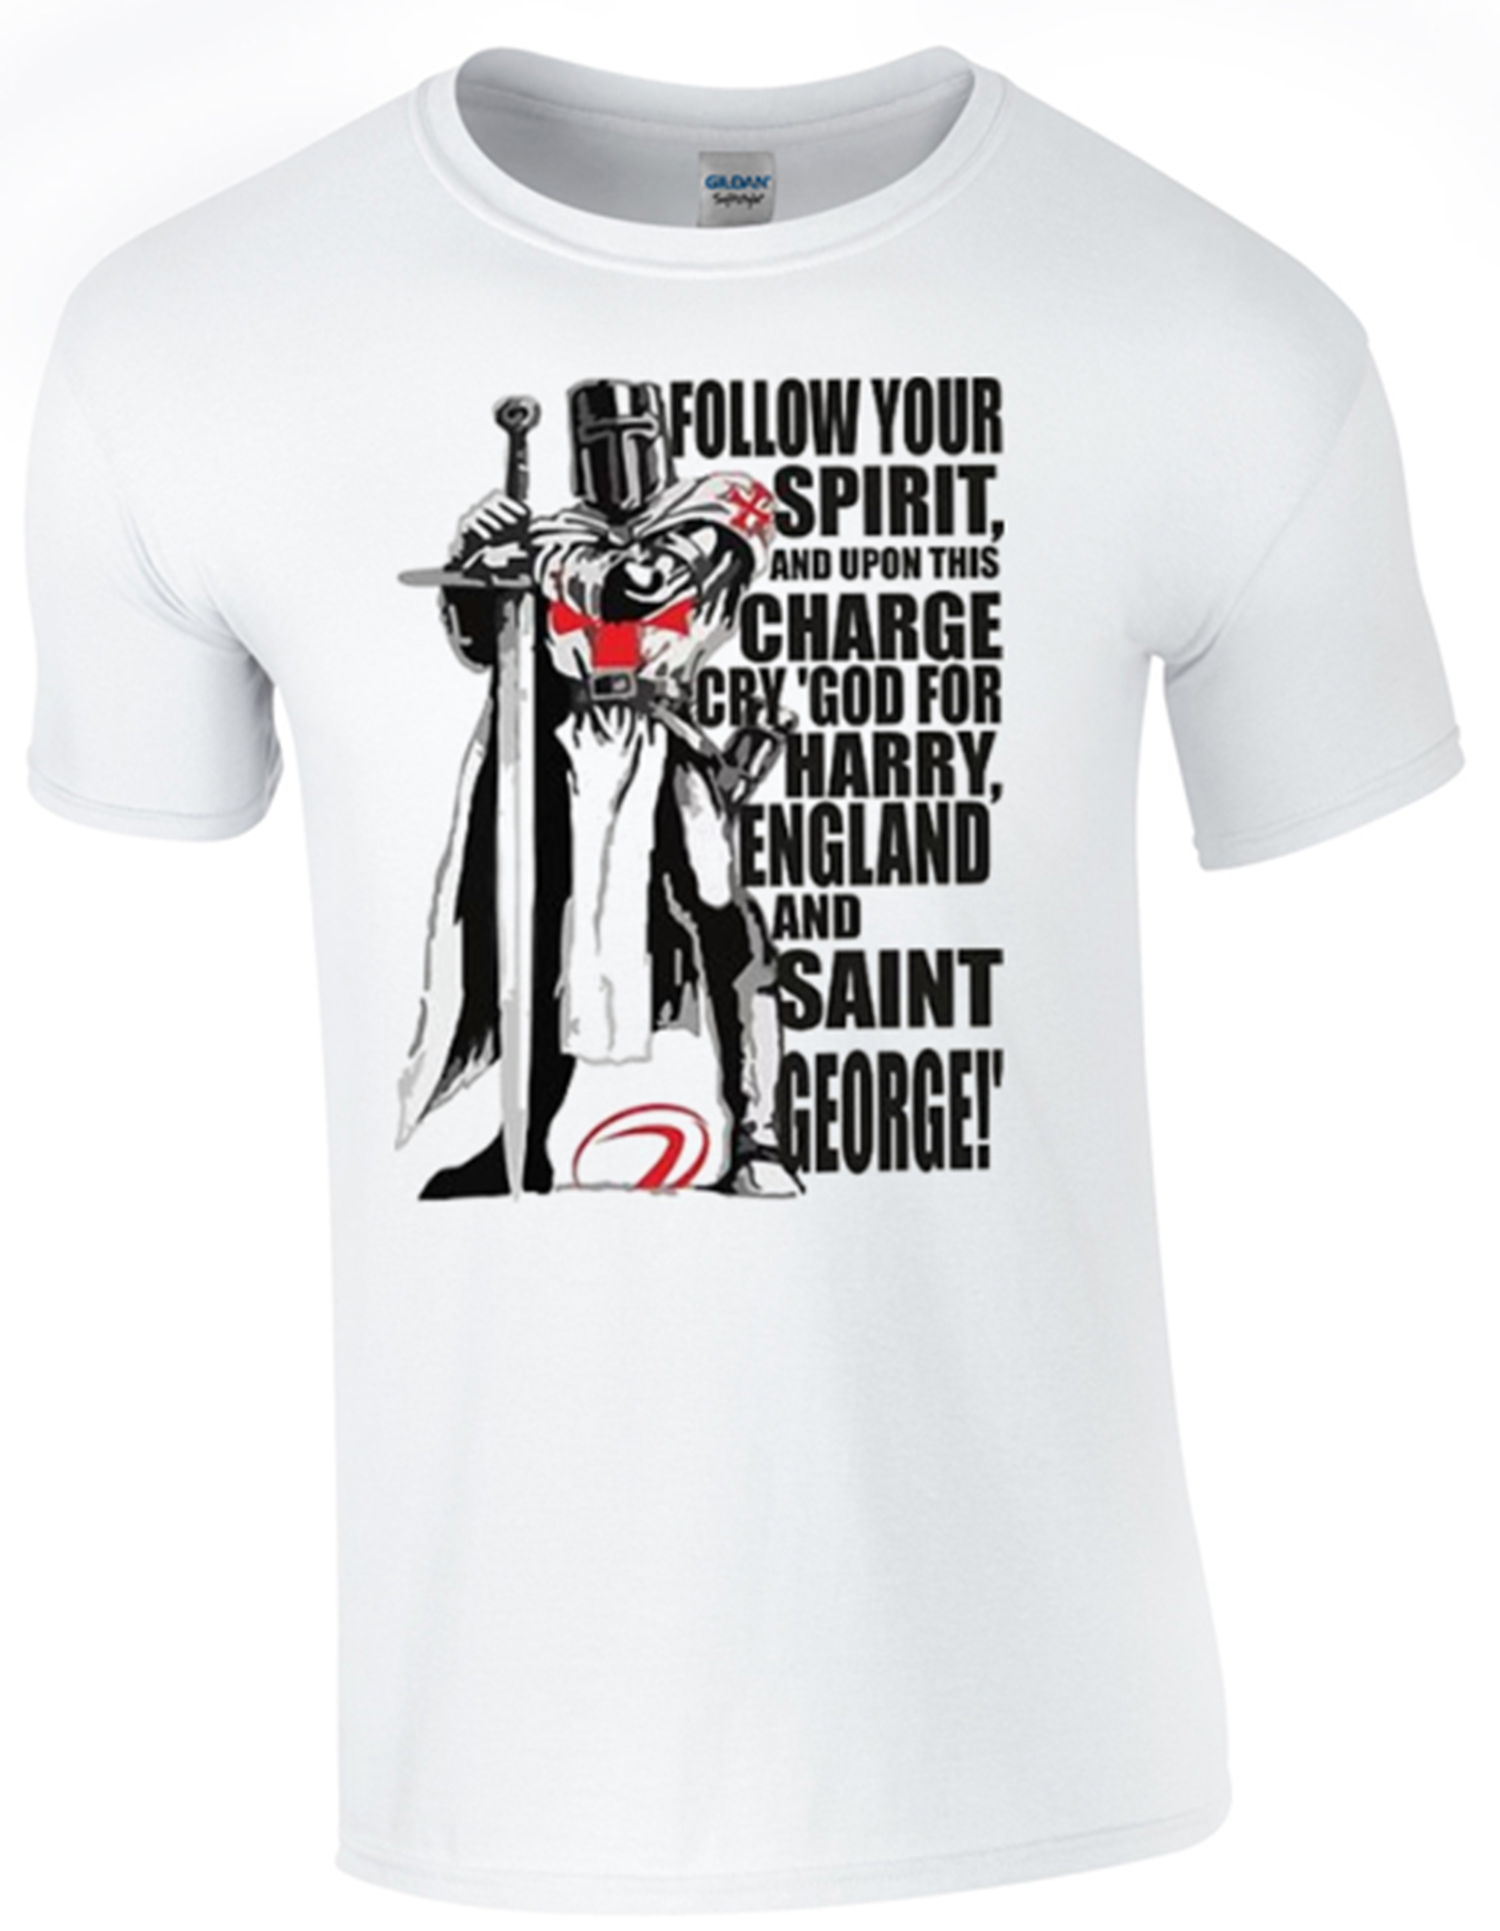 St George's Day Spirit of St George T-Shirt Printed DTG (Direct to Garment) for a Permanent Finish. - Army 1157 kit S Army 1157 Kit Veterans Owned Business